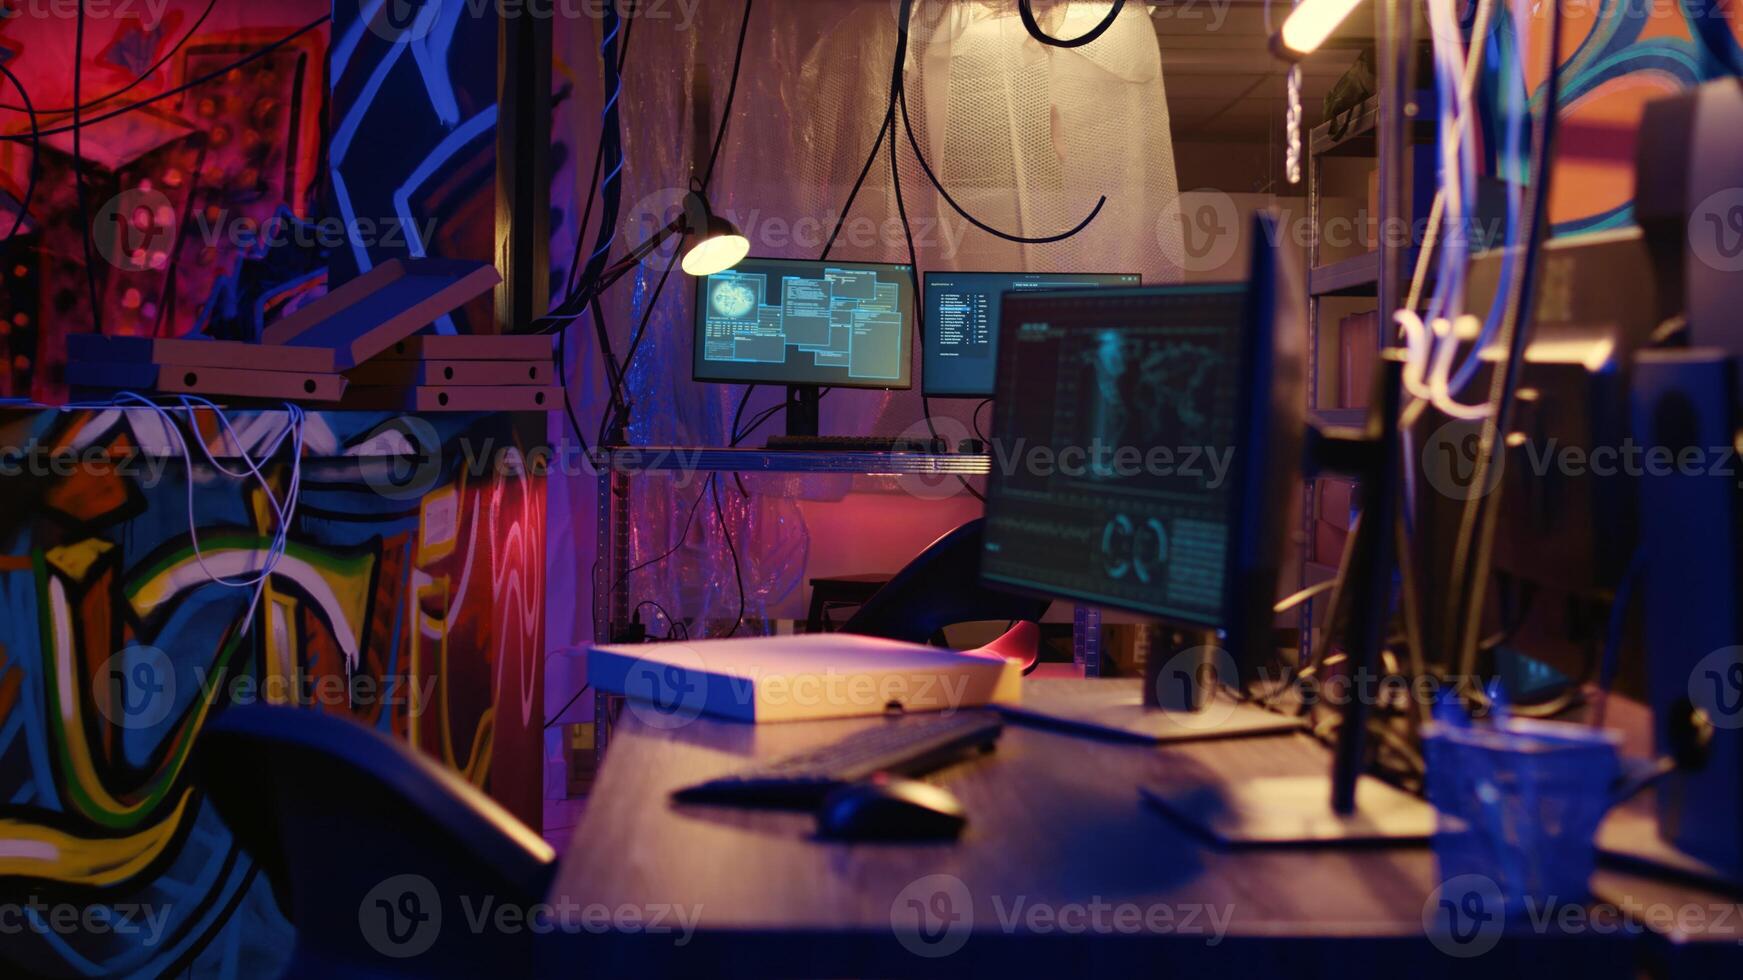 Dolly out shot of empty messy hackers base of operations with neon lights and graffiti drawings sprayed on walls. Ghetto hideout used by criminals to commit illegal activities using computers photo